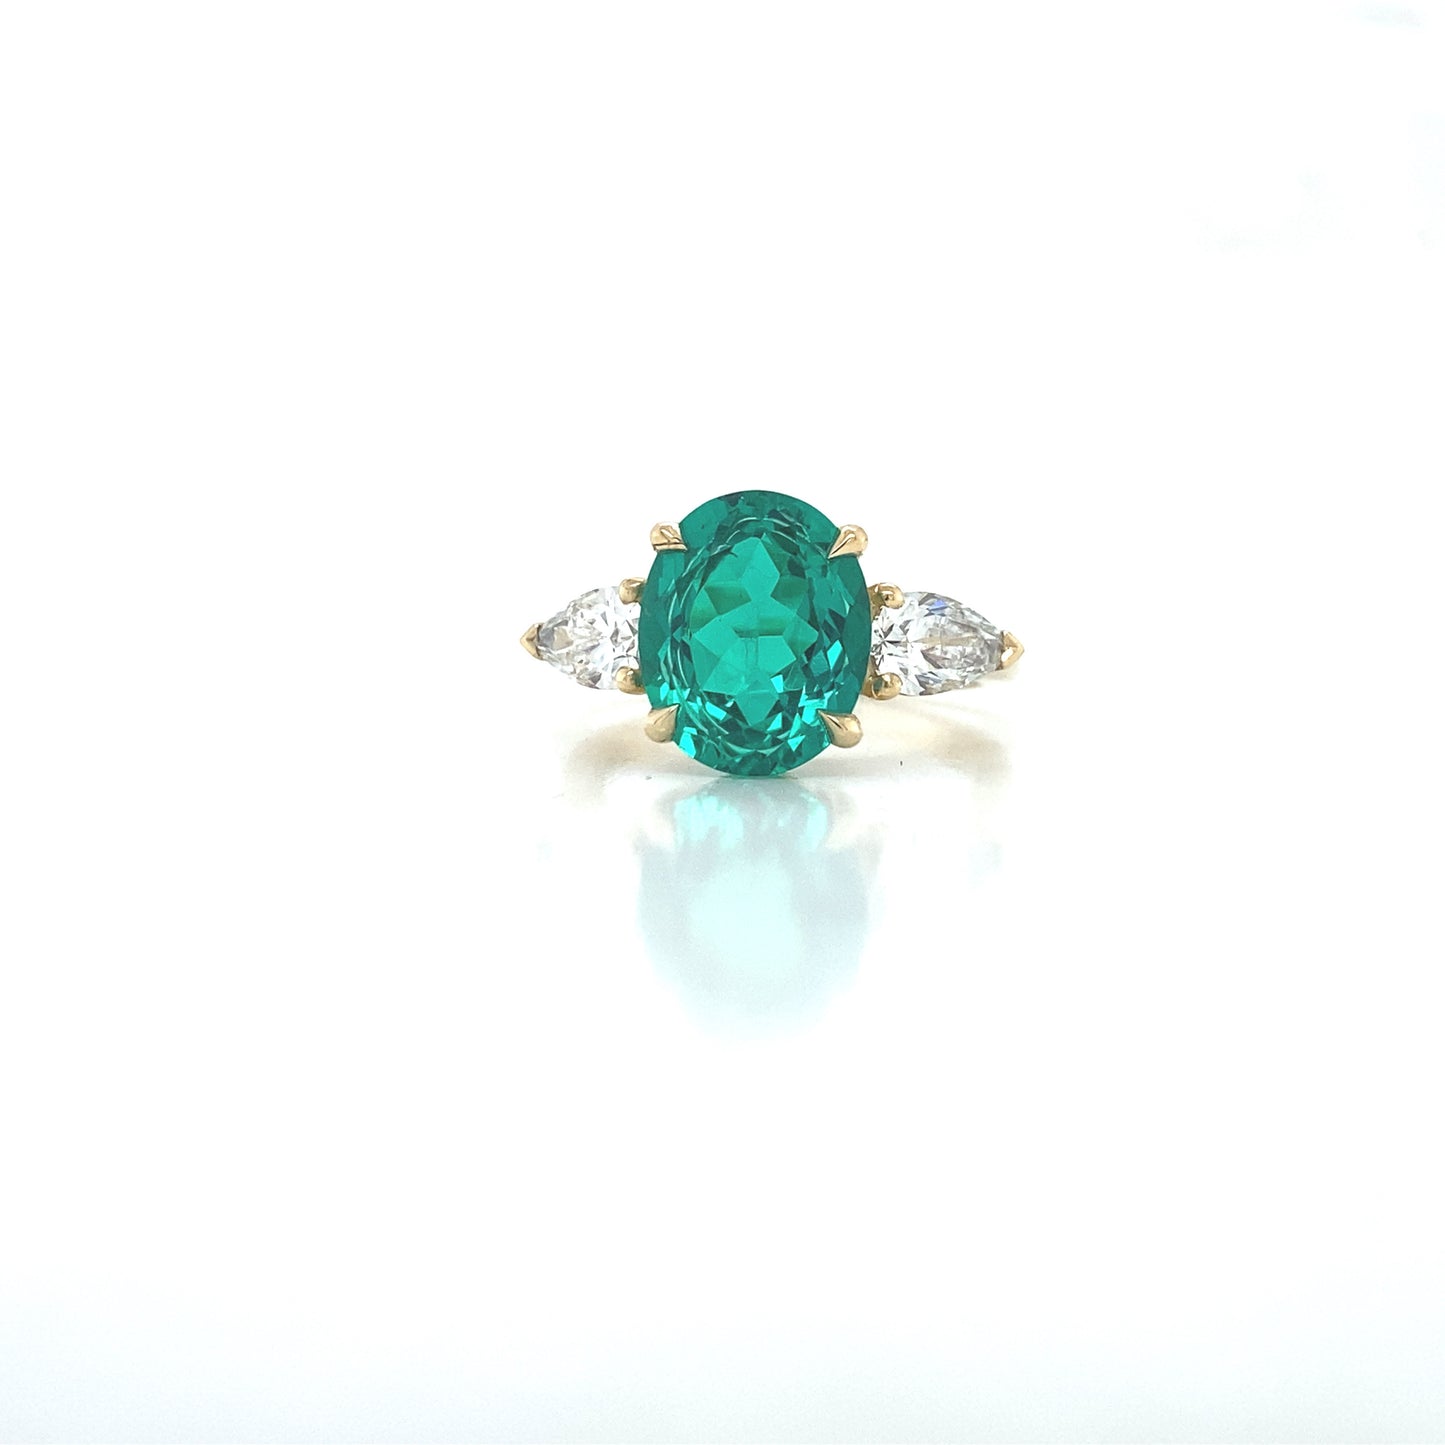 Oval emerald with pear shaped diamond side stones in 18ct yellow gold